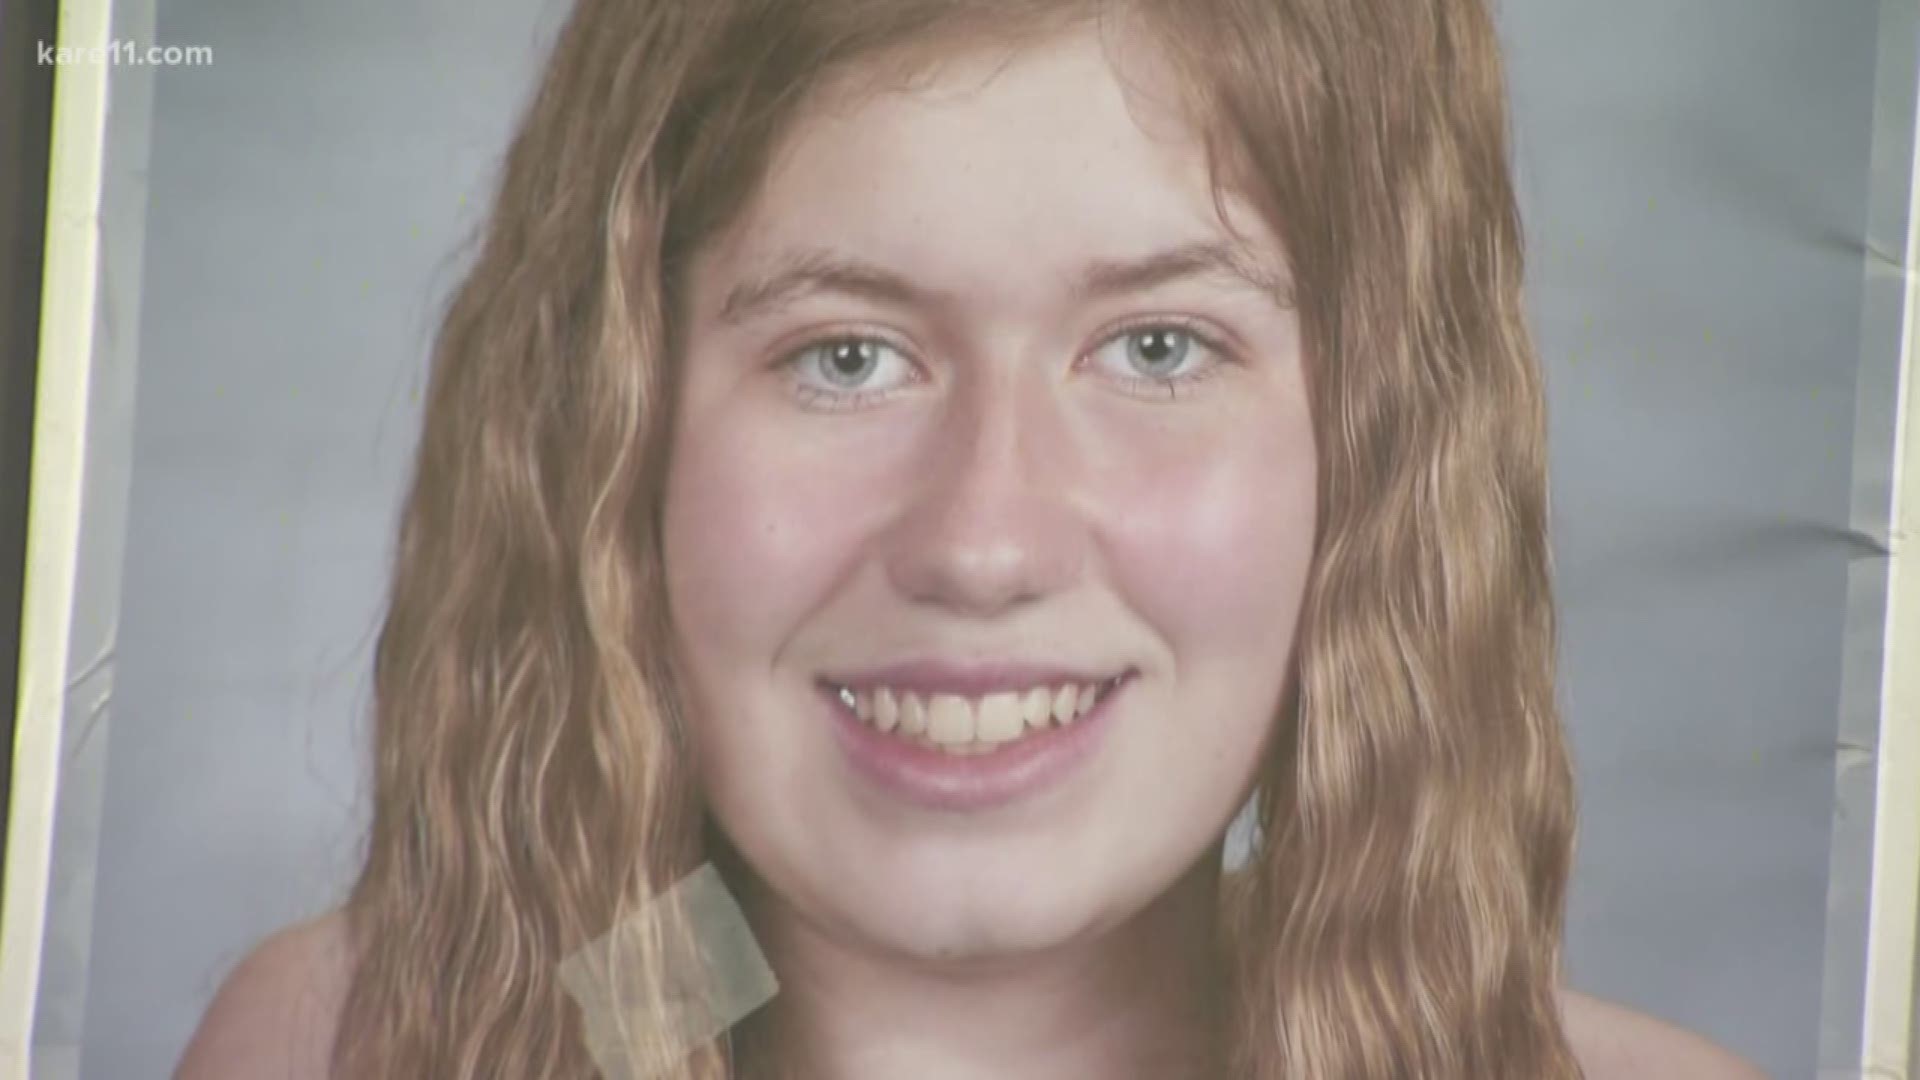 The eyes of the nation are on the small community of Barron, Wis., after a couple was discovered dead inside their home early Monday and their 13-year-old daughter was found to be missing, most likely abducted. KARE 11's Kent Erdahl has an overview of wha